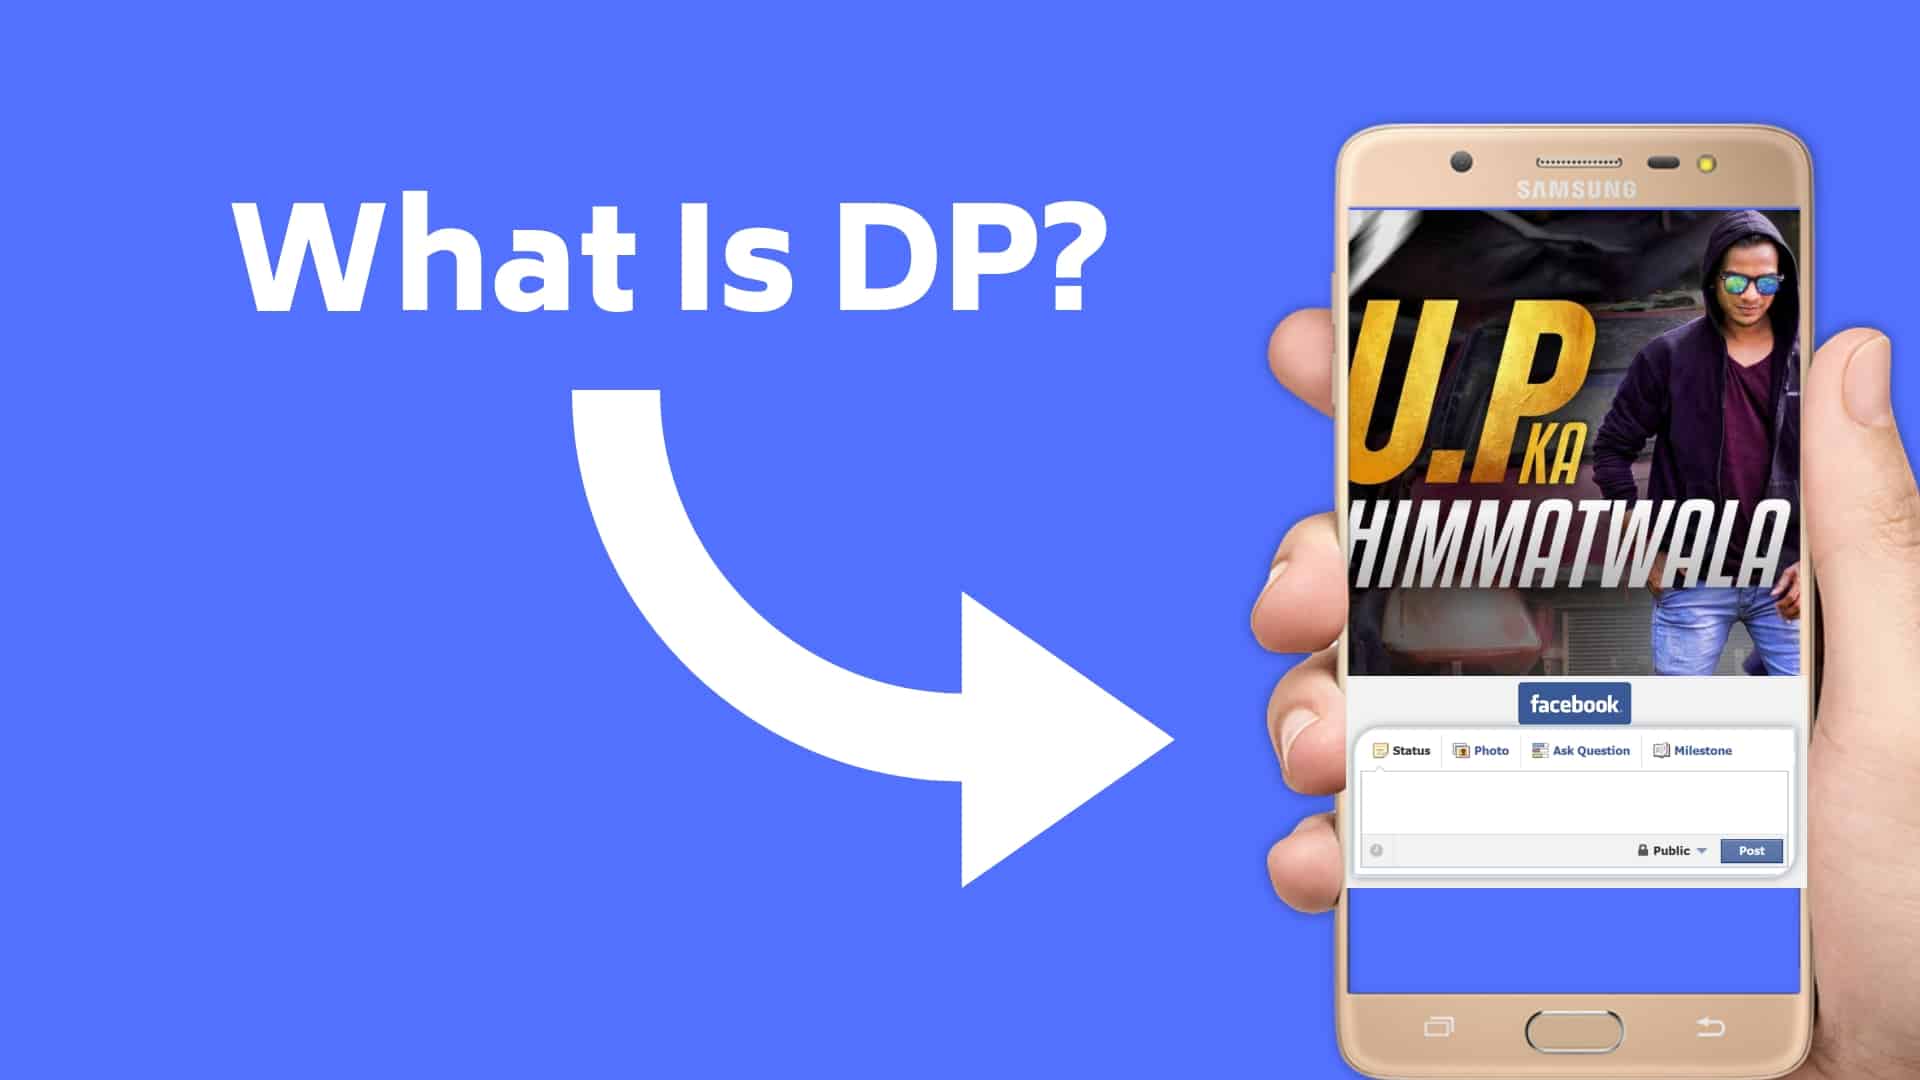 DP meaning